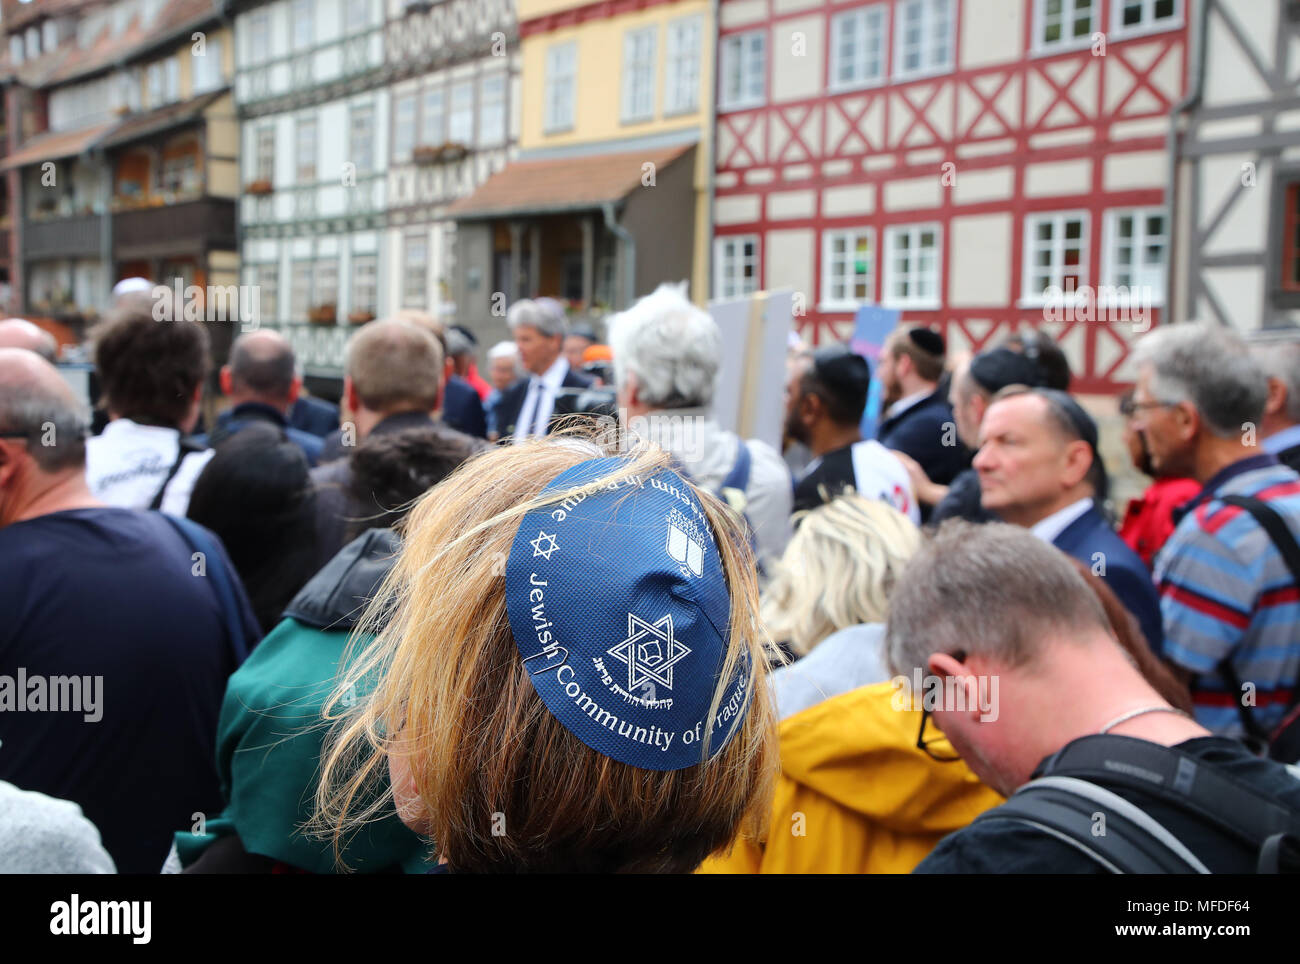 Erfurt, Germany. 25 April Germany, Germany, Erfurt: A participant in a demonstration wearing a Kippa in the city centre of Erfurt. The demonstration in front of the new synagogue in Erfurt takes a stance against anti-Semitism and exclusion. Photo: Bodo Schackow/dpa-Zentralbild/dpa Credit: dpa picture alliance/Alamy Live News Stock Photo